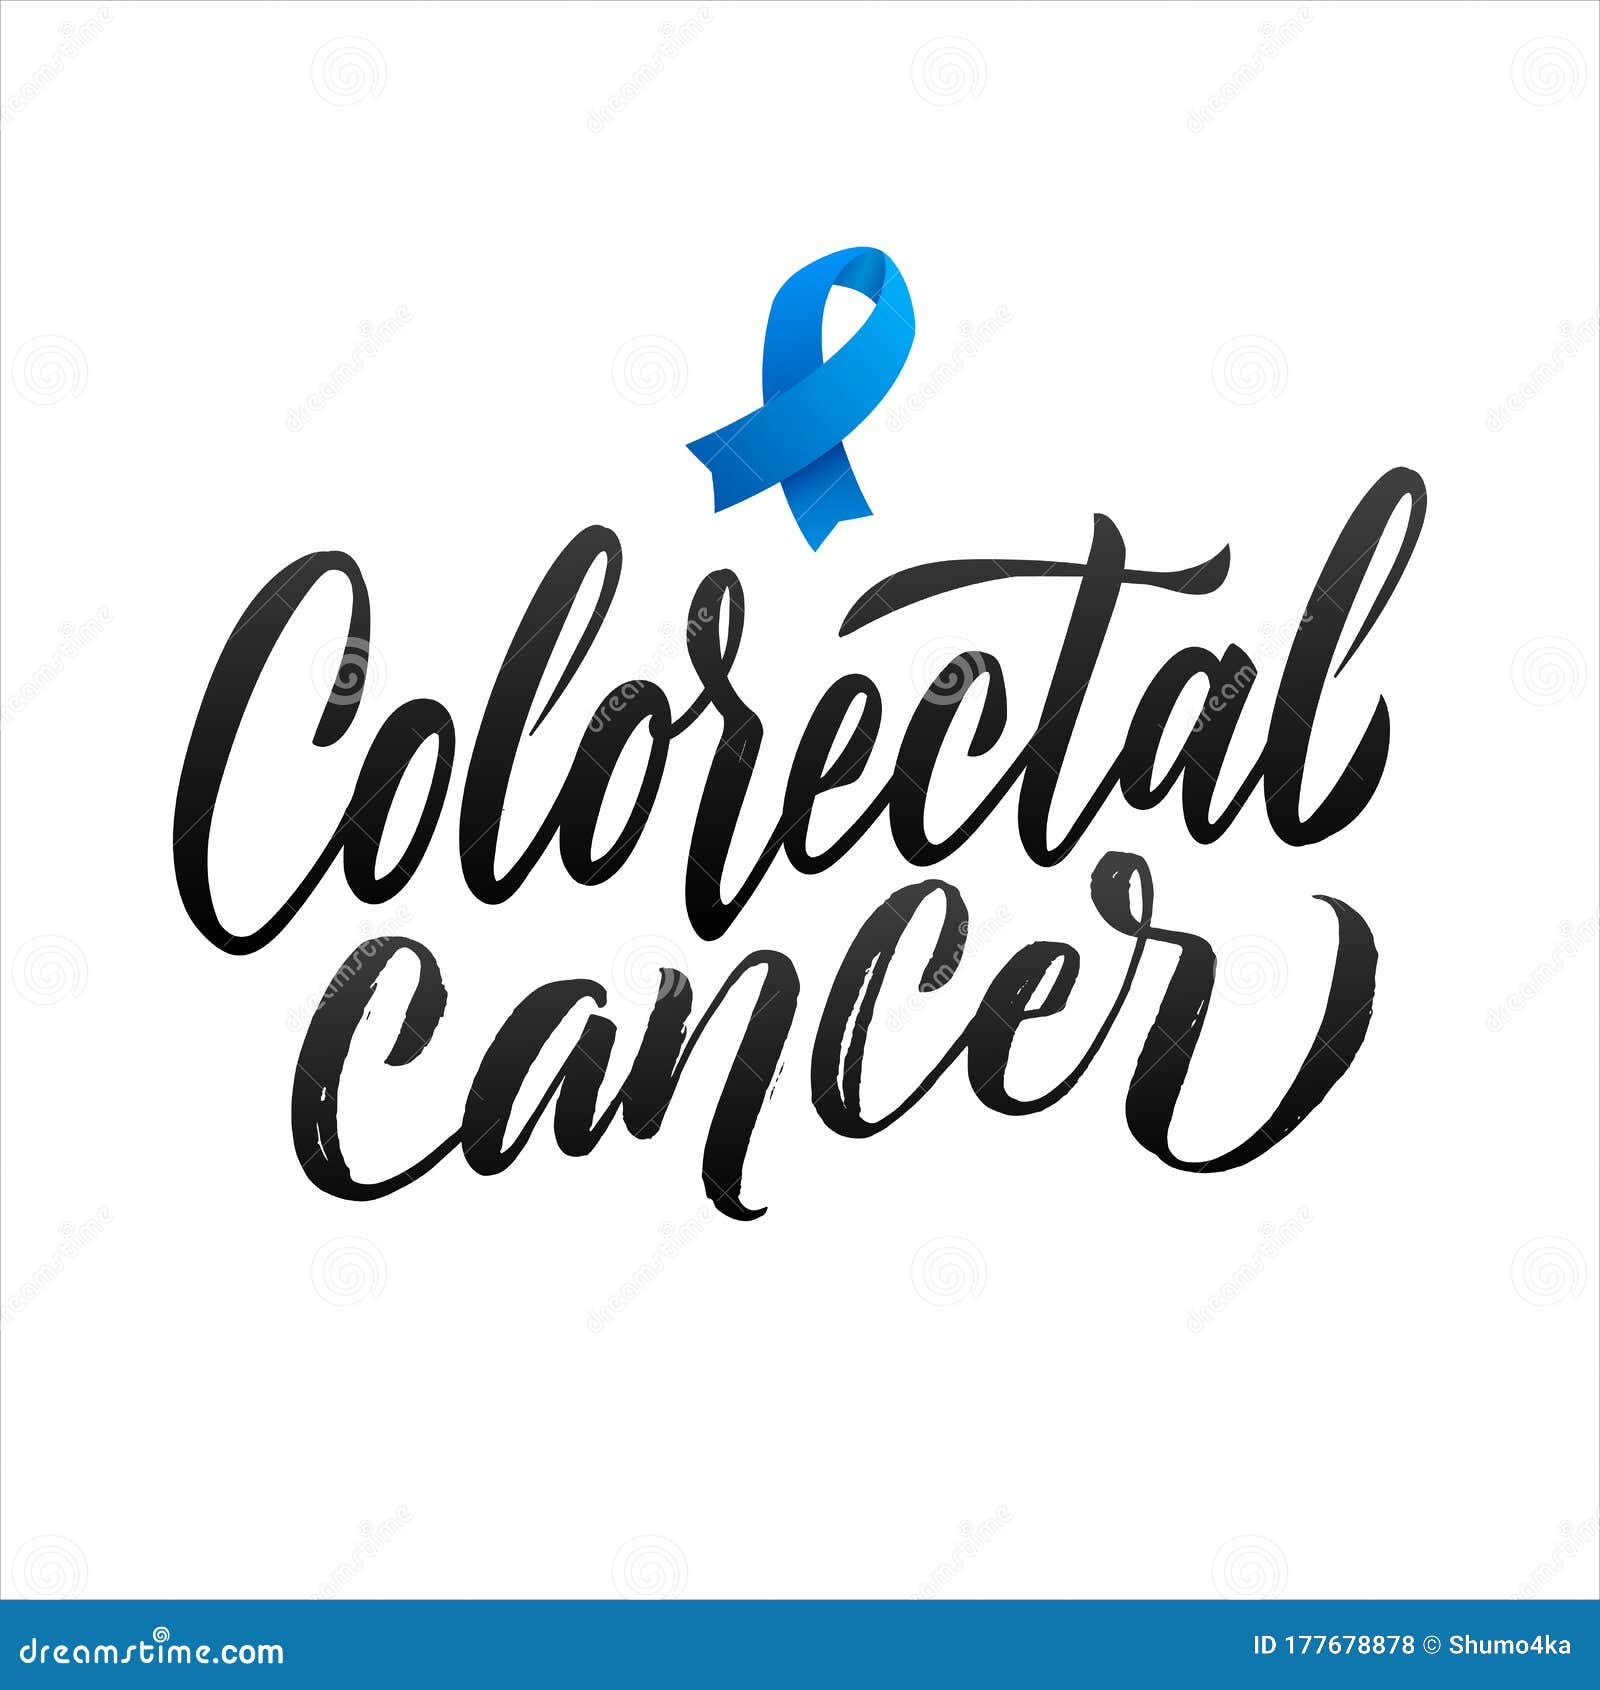 Colorectal Cancer Vector Illustration. Ribbon Around Letters. Vector ...